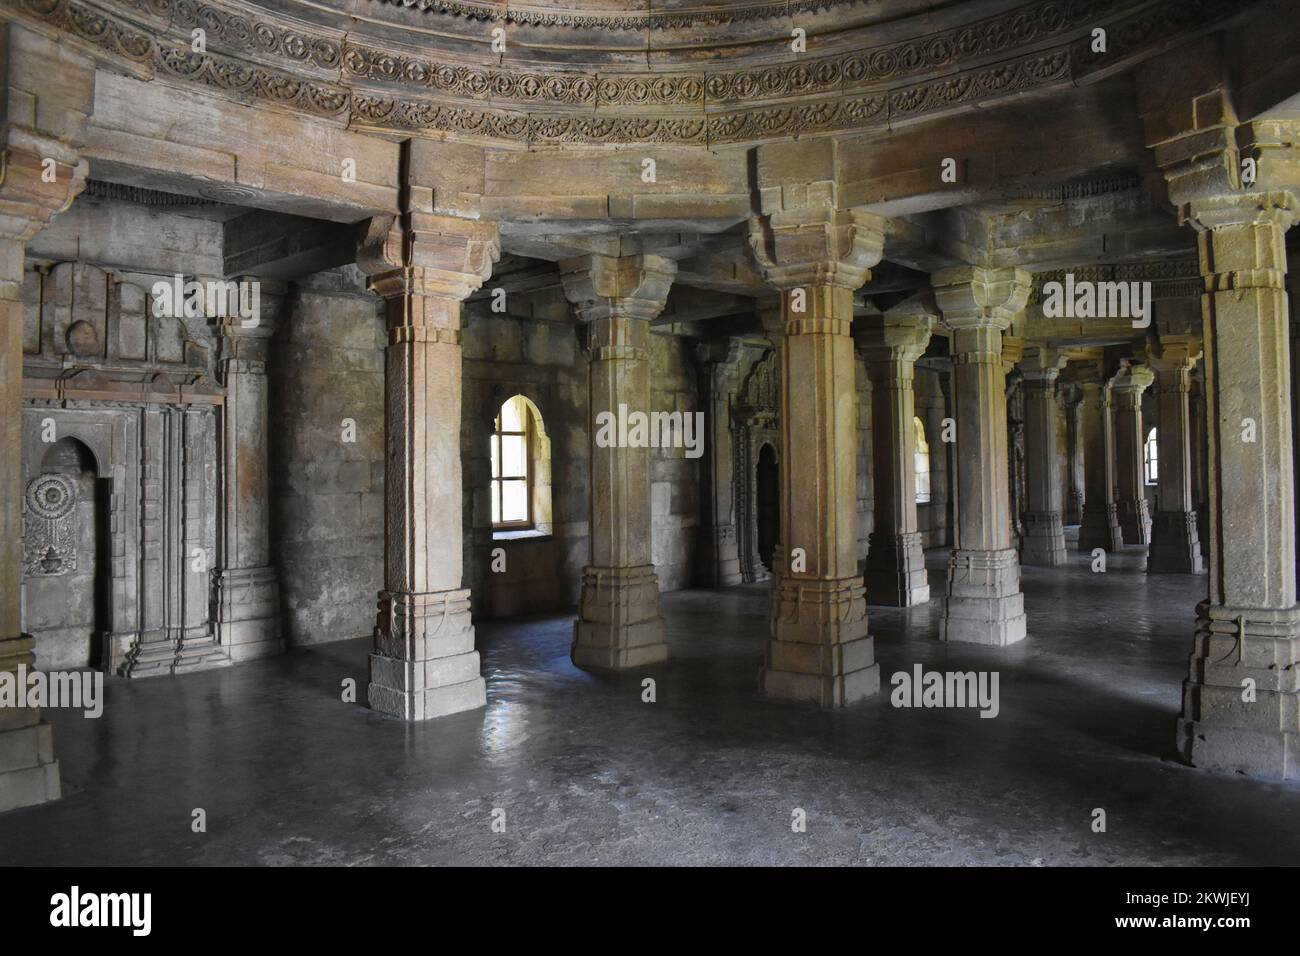 Shaher ki Masjid, Interior view, Stone carvings work on Pillars, Wall and Dome, built by Sultan Mahmud Begada 15th - 16th century. A UNESCO World Heri Stock Photo